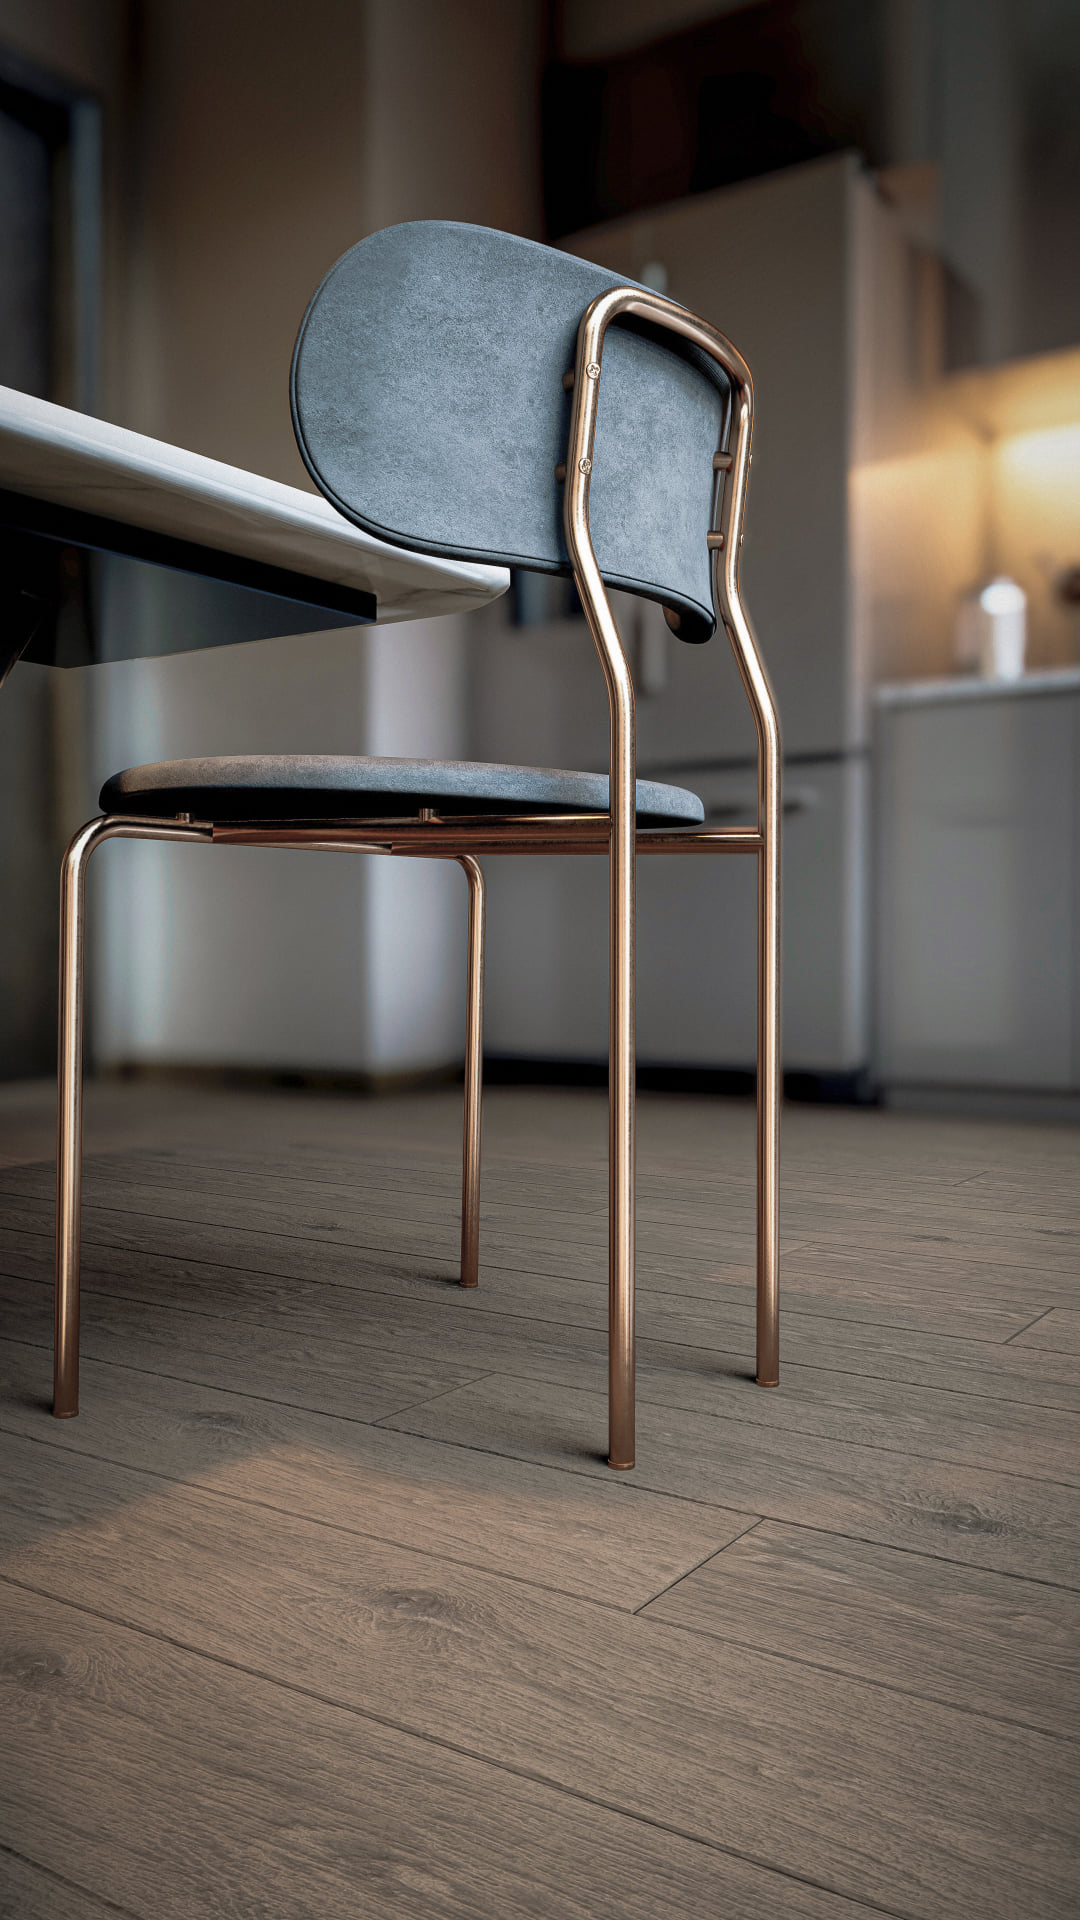 Chair on wooden floor, rendered in Lumion 11 by 3D Fernandes